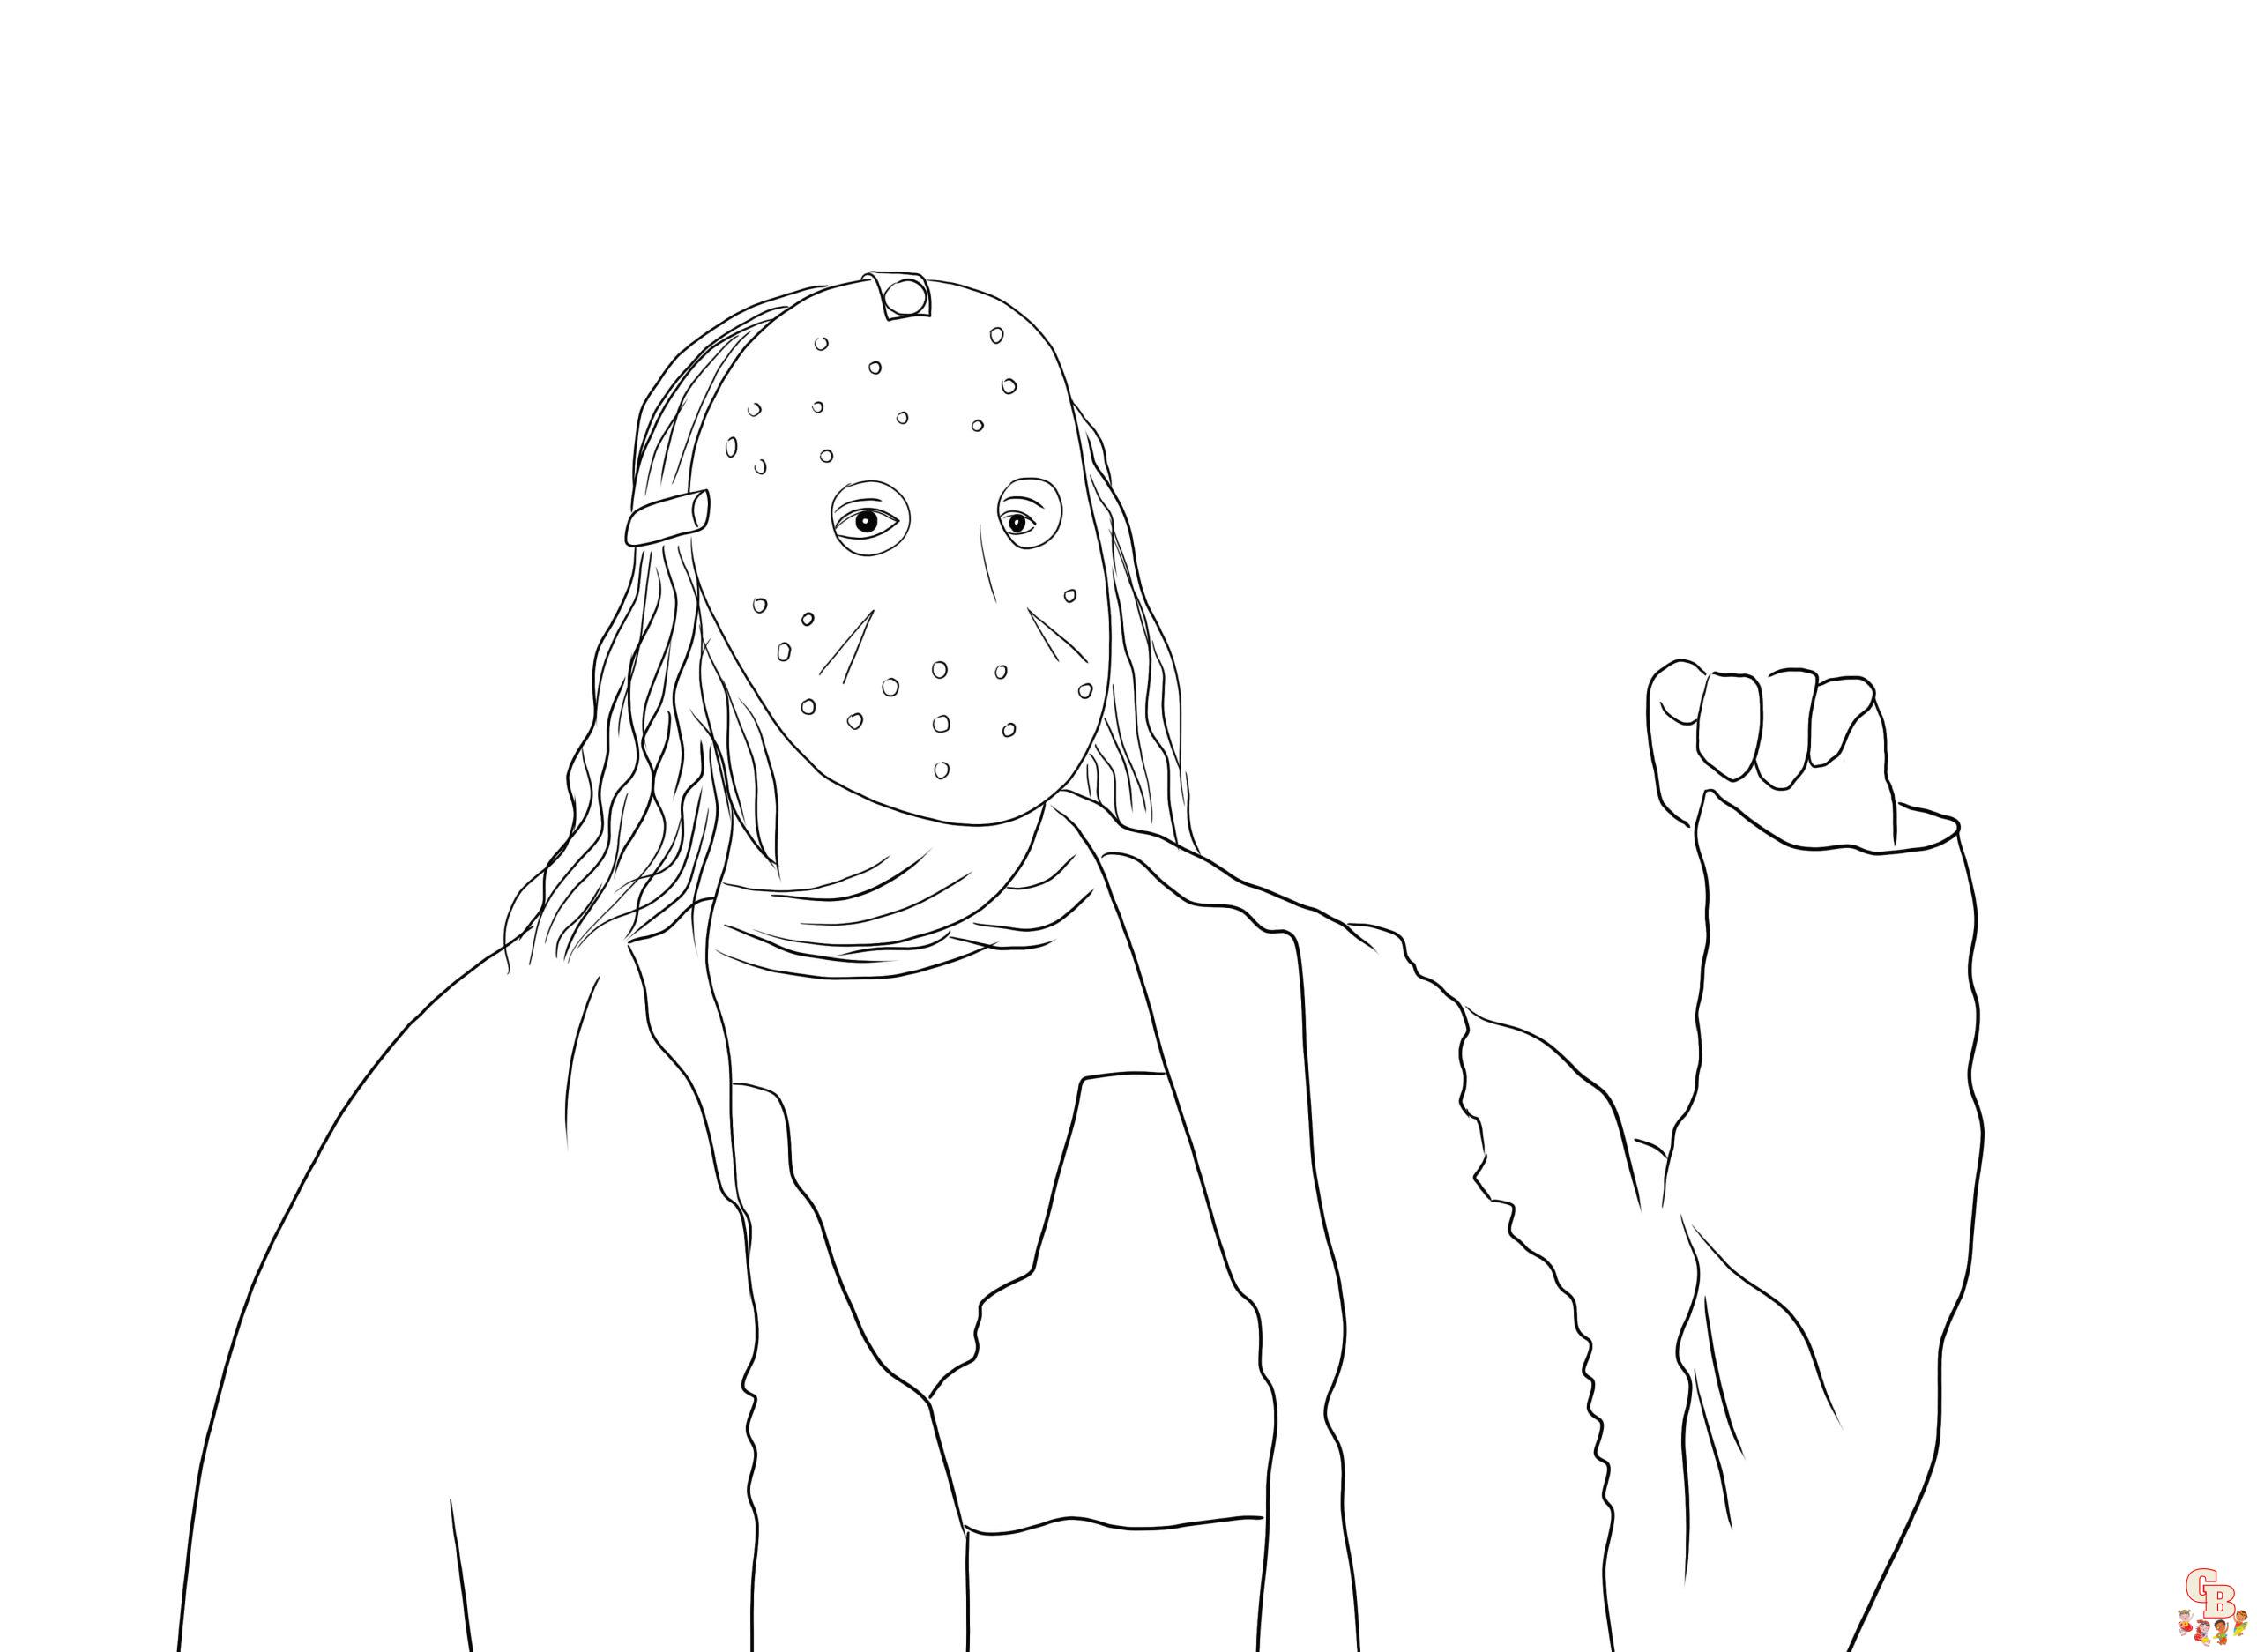 Friday the 13th Coloring Sheets